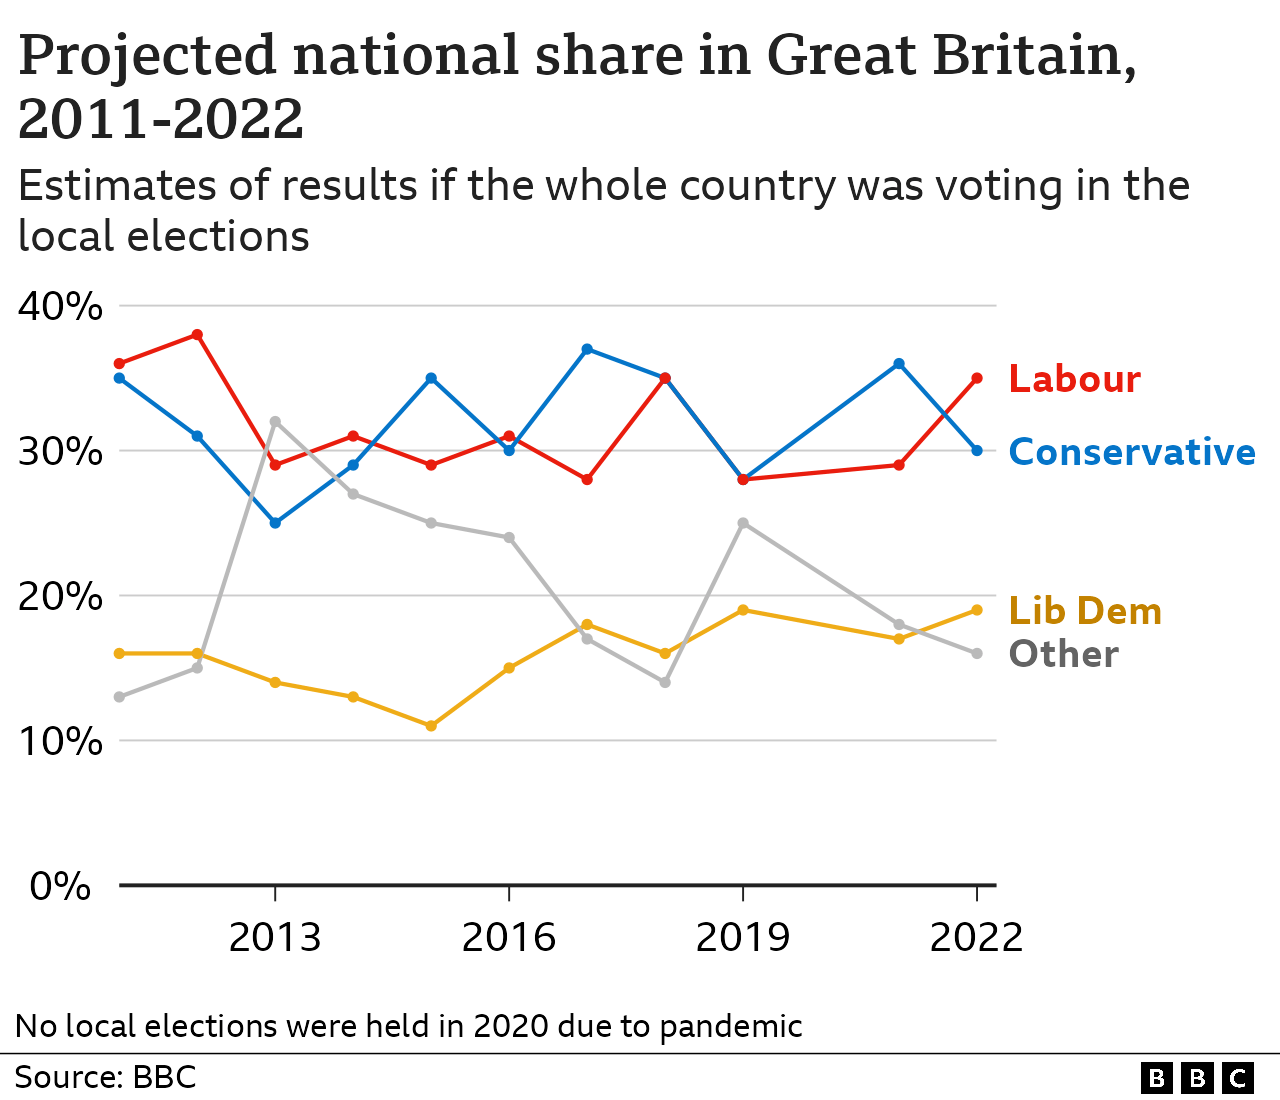 Line chart showing estimates of results if the whole country was voting in the local elections between 2011-2022, showing the Conservatives and Labour changing places as the largest party with the Liberal Democrats around ten points behind throughout the period.